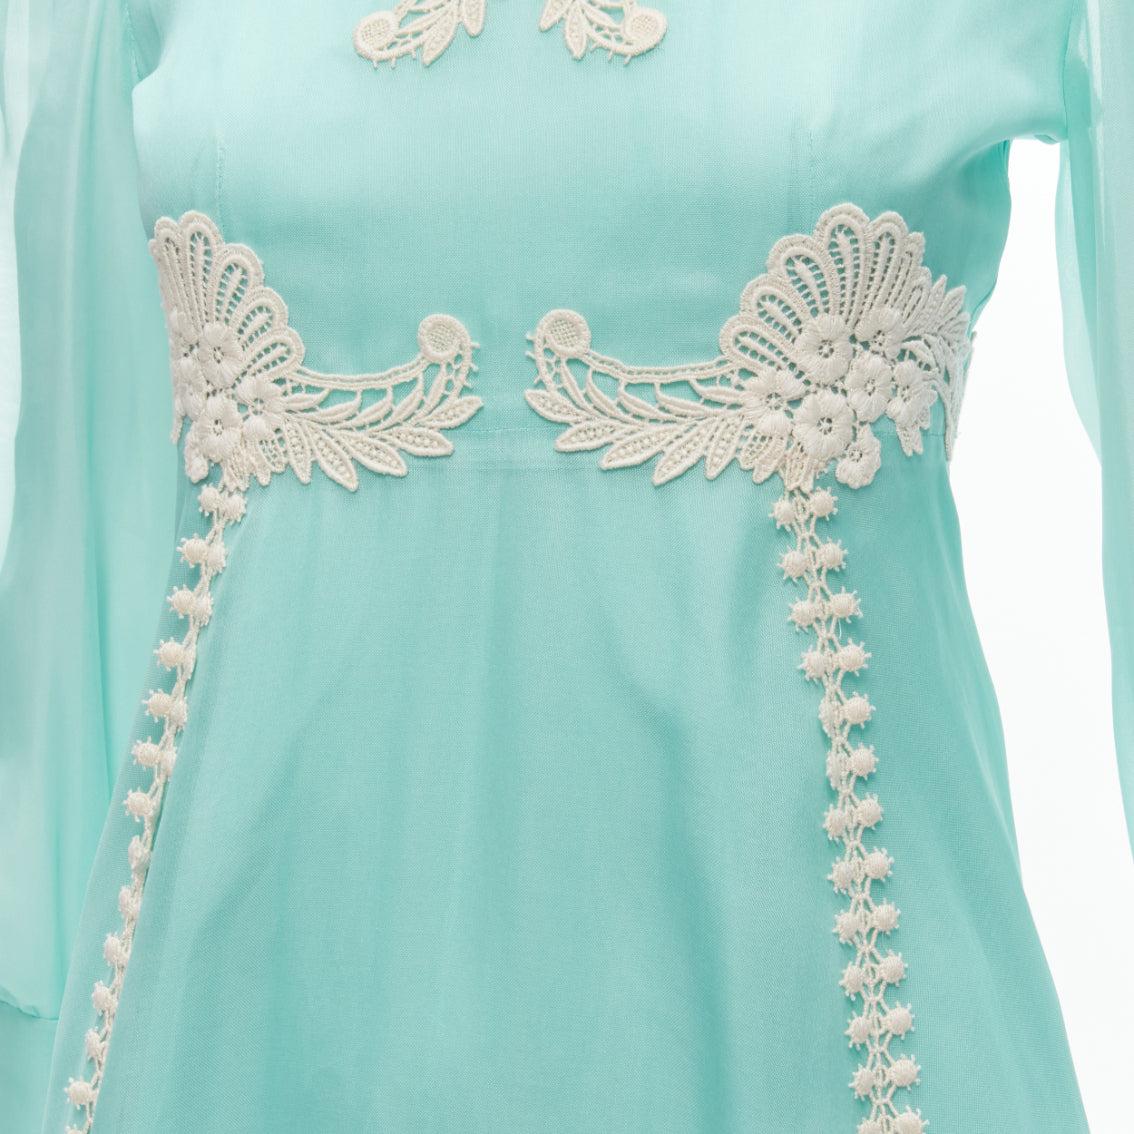 rare GUCCI Alessandro Michele 2019 Runway sky blue 100% silk cream embroidery puff sleeve gown S
Reference: TGAS/D00617
Brand: Gucci
Designer: Alessandro Michele
Collection: Resort 2019 - Runway
As seen on: Colette' Actor Aiysha Hart
Material: